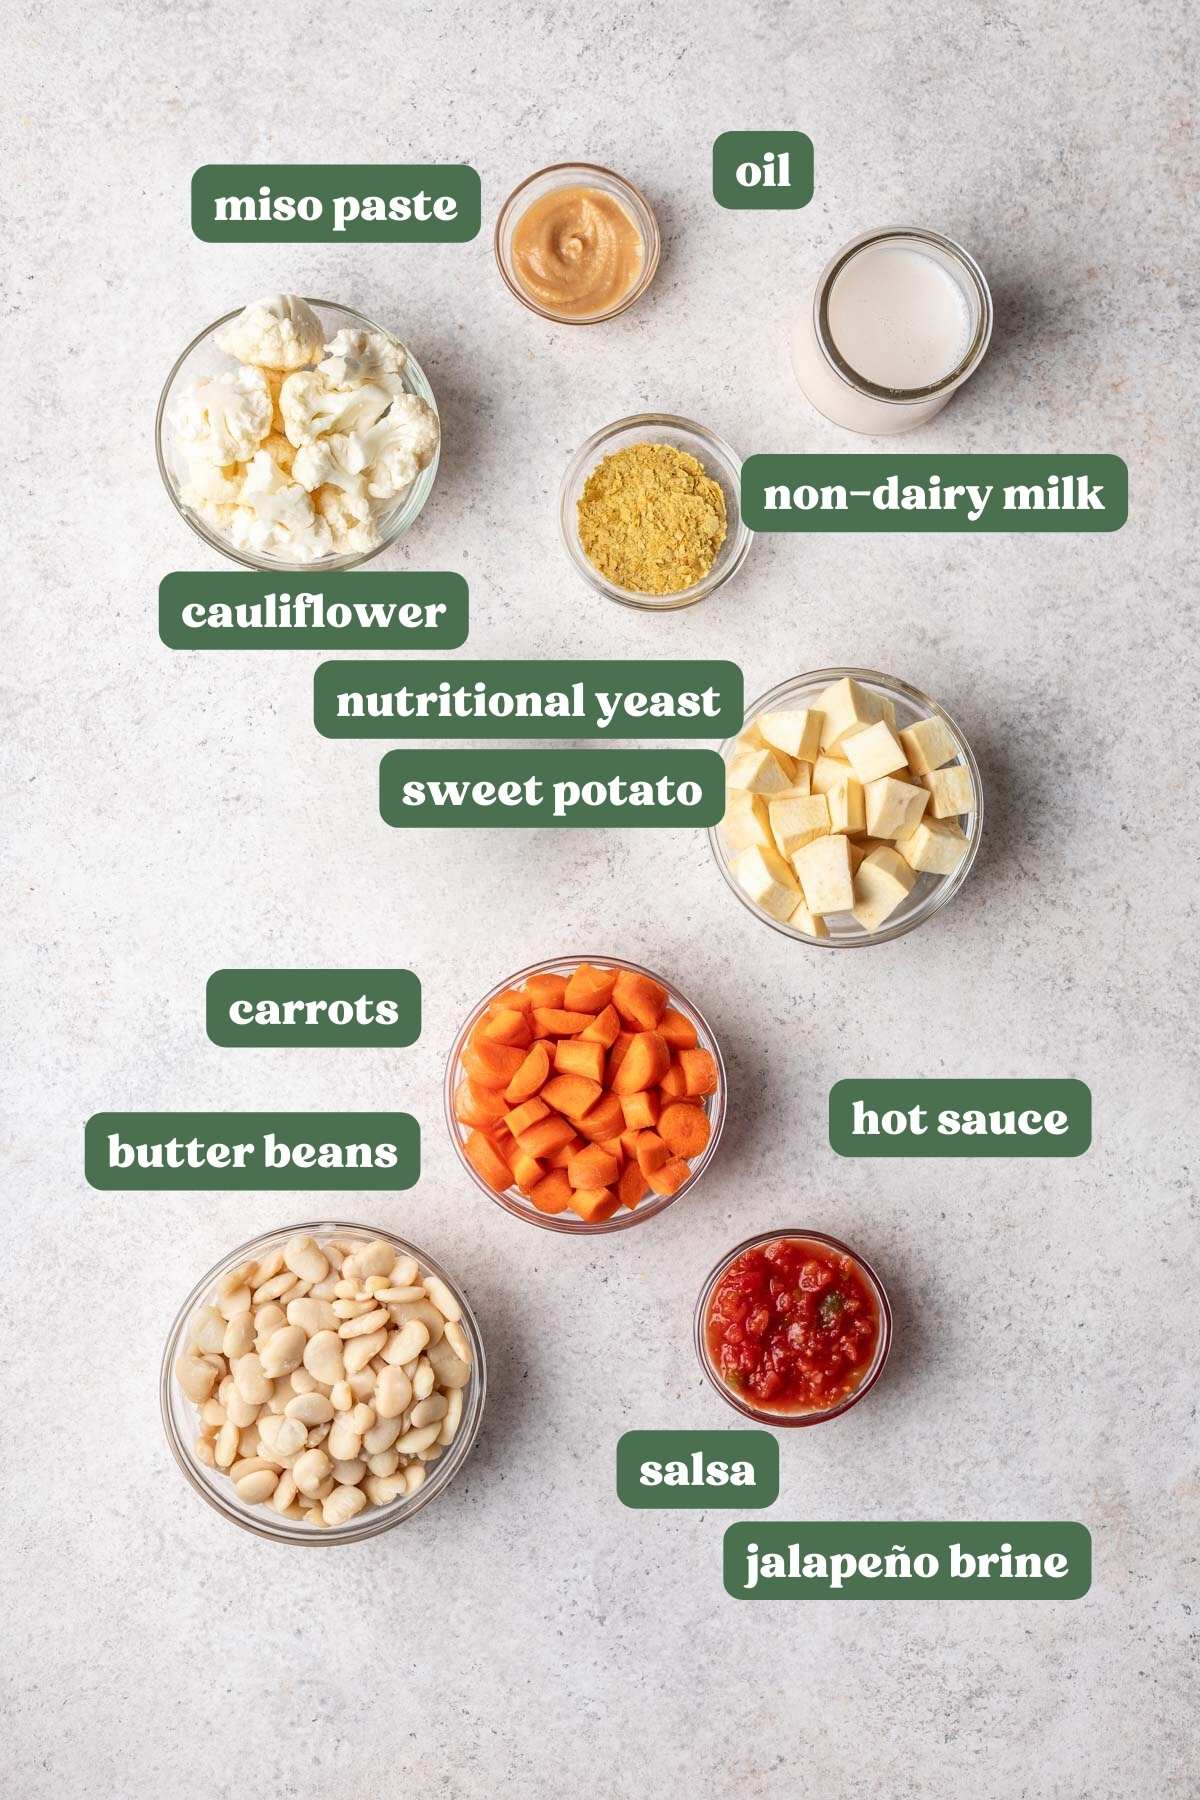 Ingredients labeled and measured to make vegan nacho cheese without cashews.